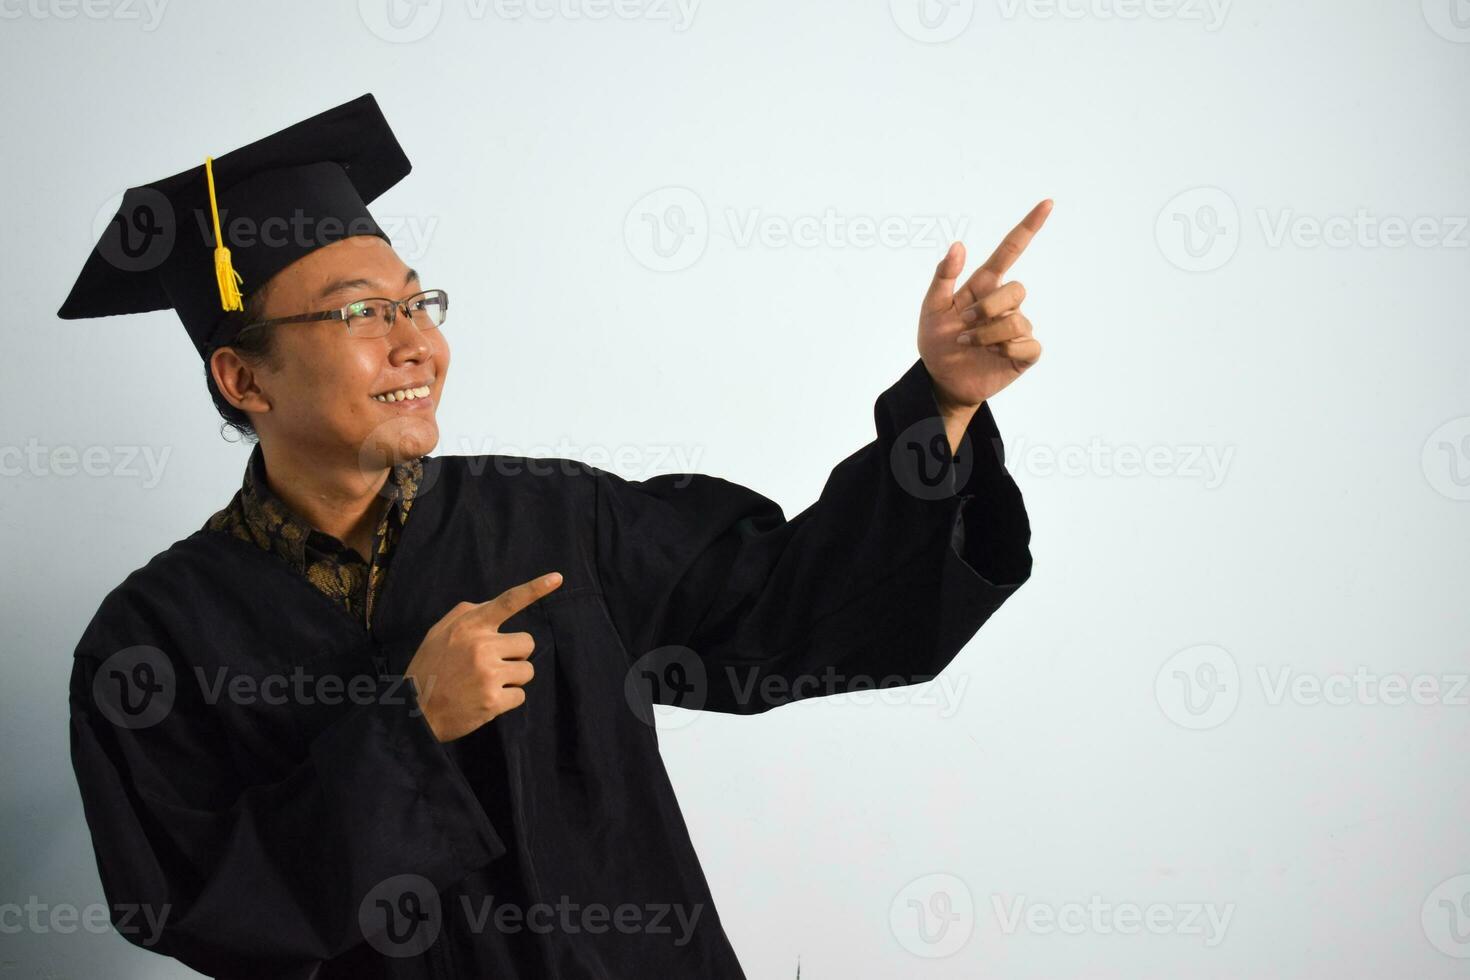 Expressive of Adult indonesia male wear graduation robe, hat and eyeglasses isolated on white background, expressions of portrait graduation photo